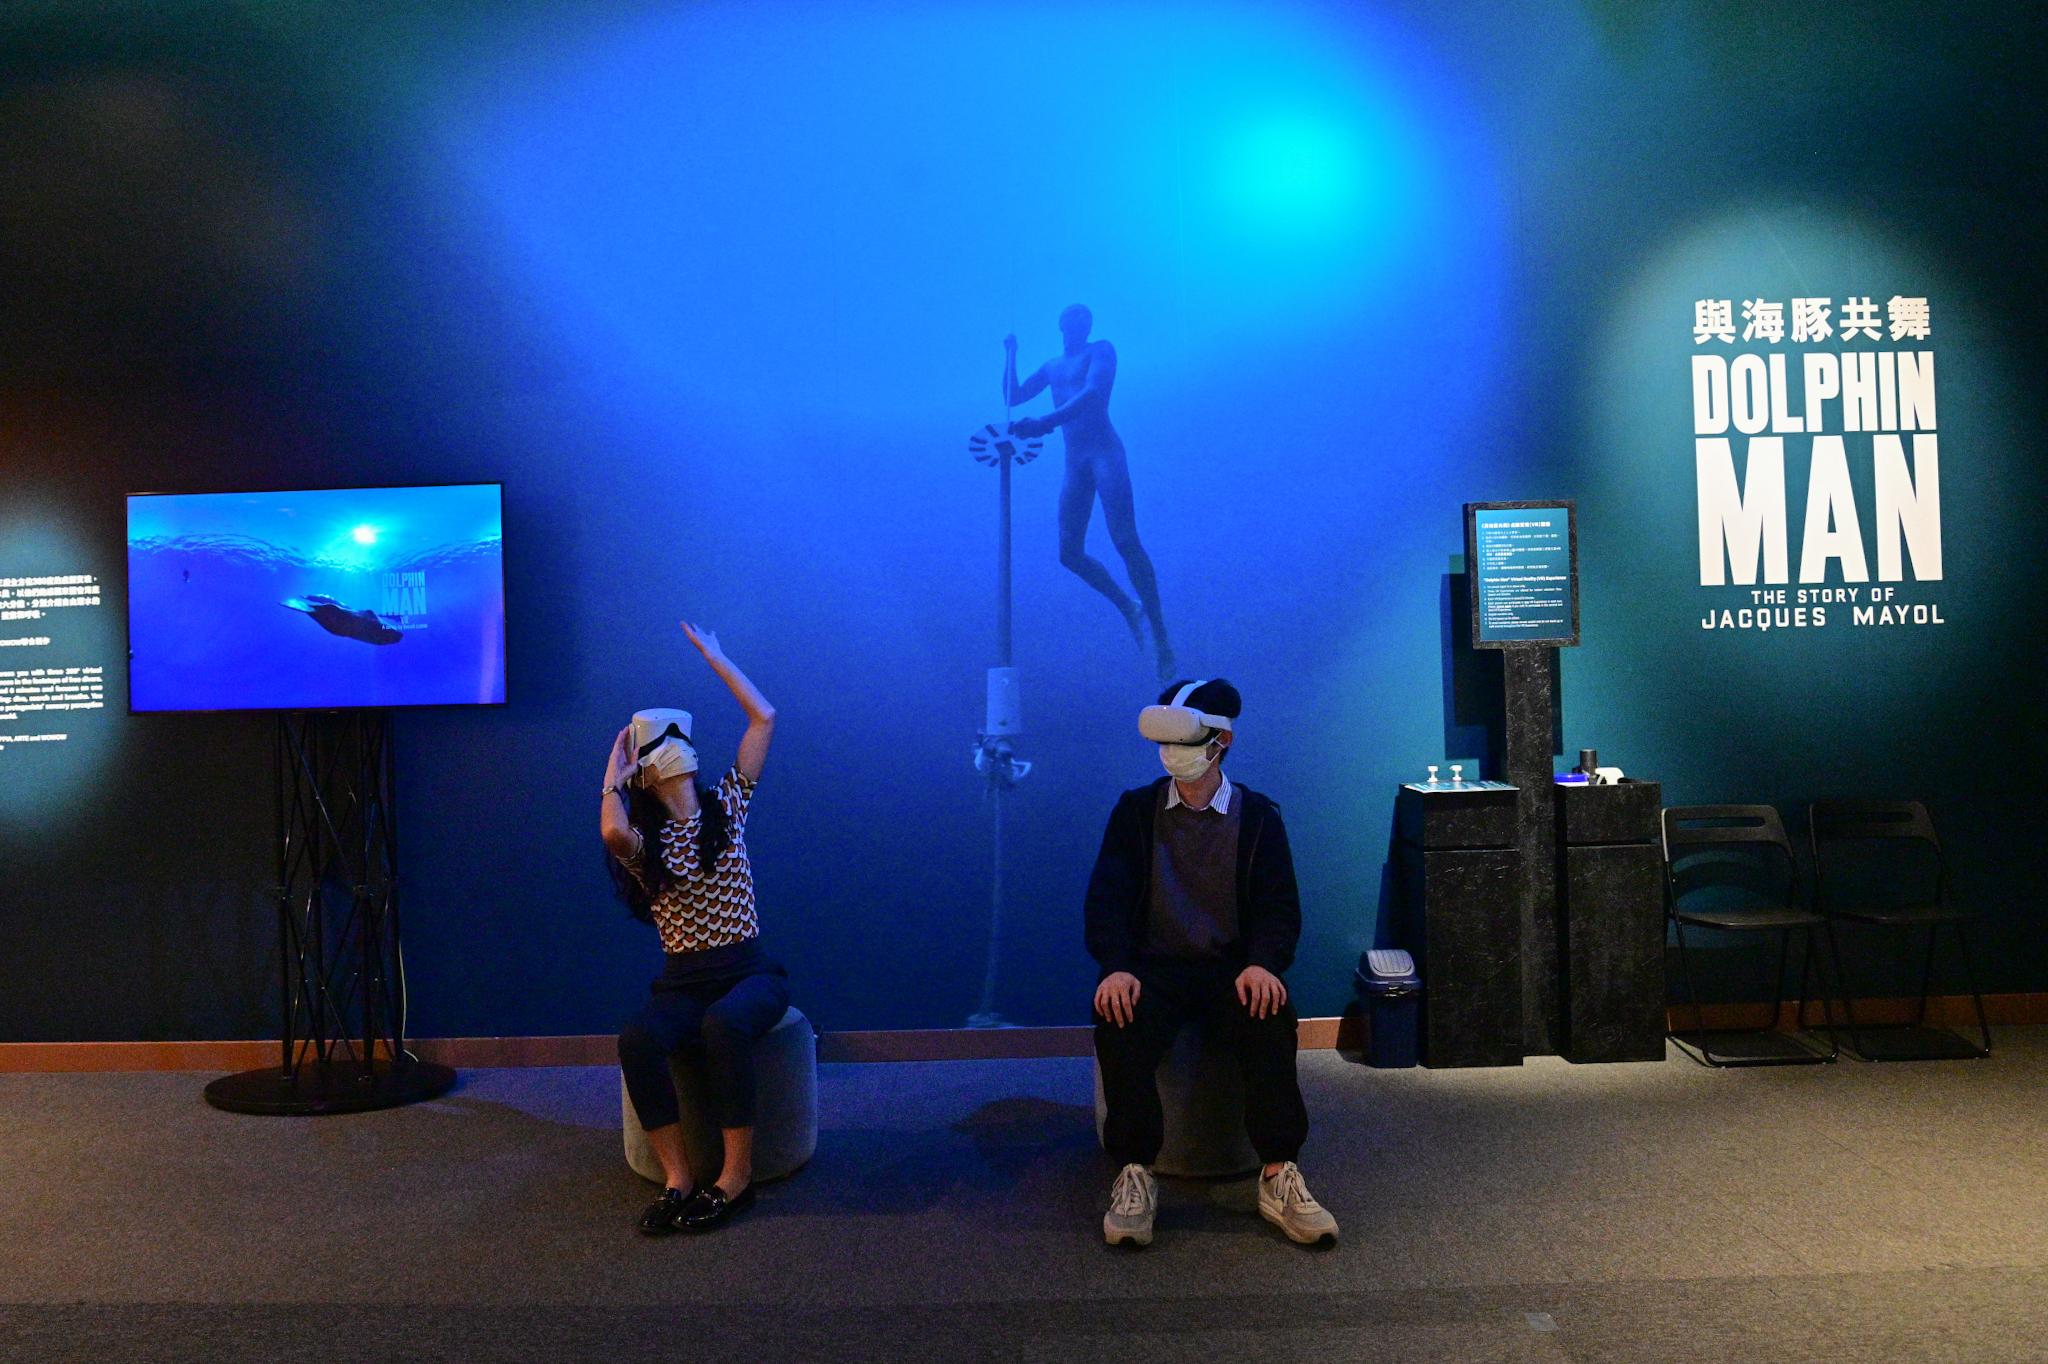 The exhibition “The Invisible Becomes Visible”, a highlight programme of French Science Festival: [BIO]diversity, will be staged at the Hong Kong Science Museum from tomorrow (November 11) to November 27. Visitors can explore the underwater world with the virtual reality experience of “Dolphin Man”.